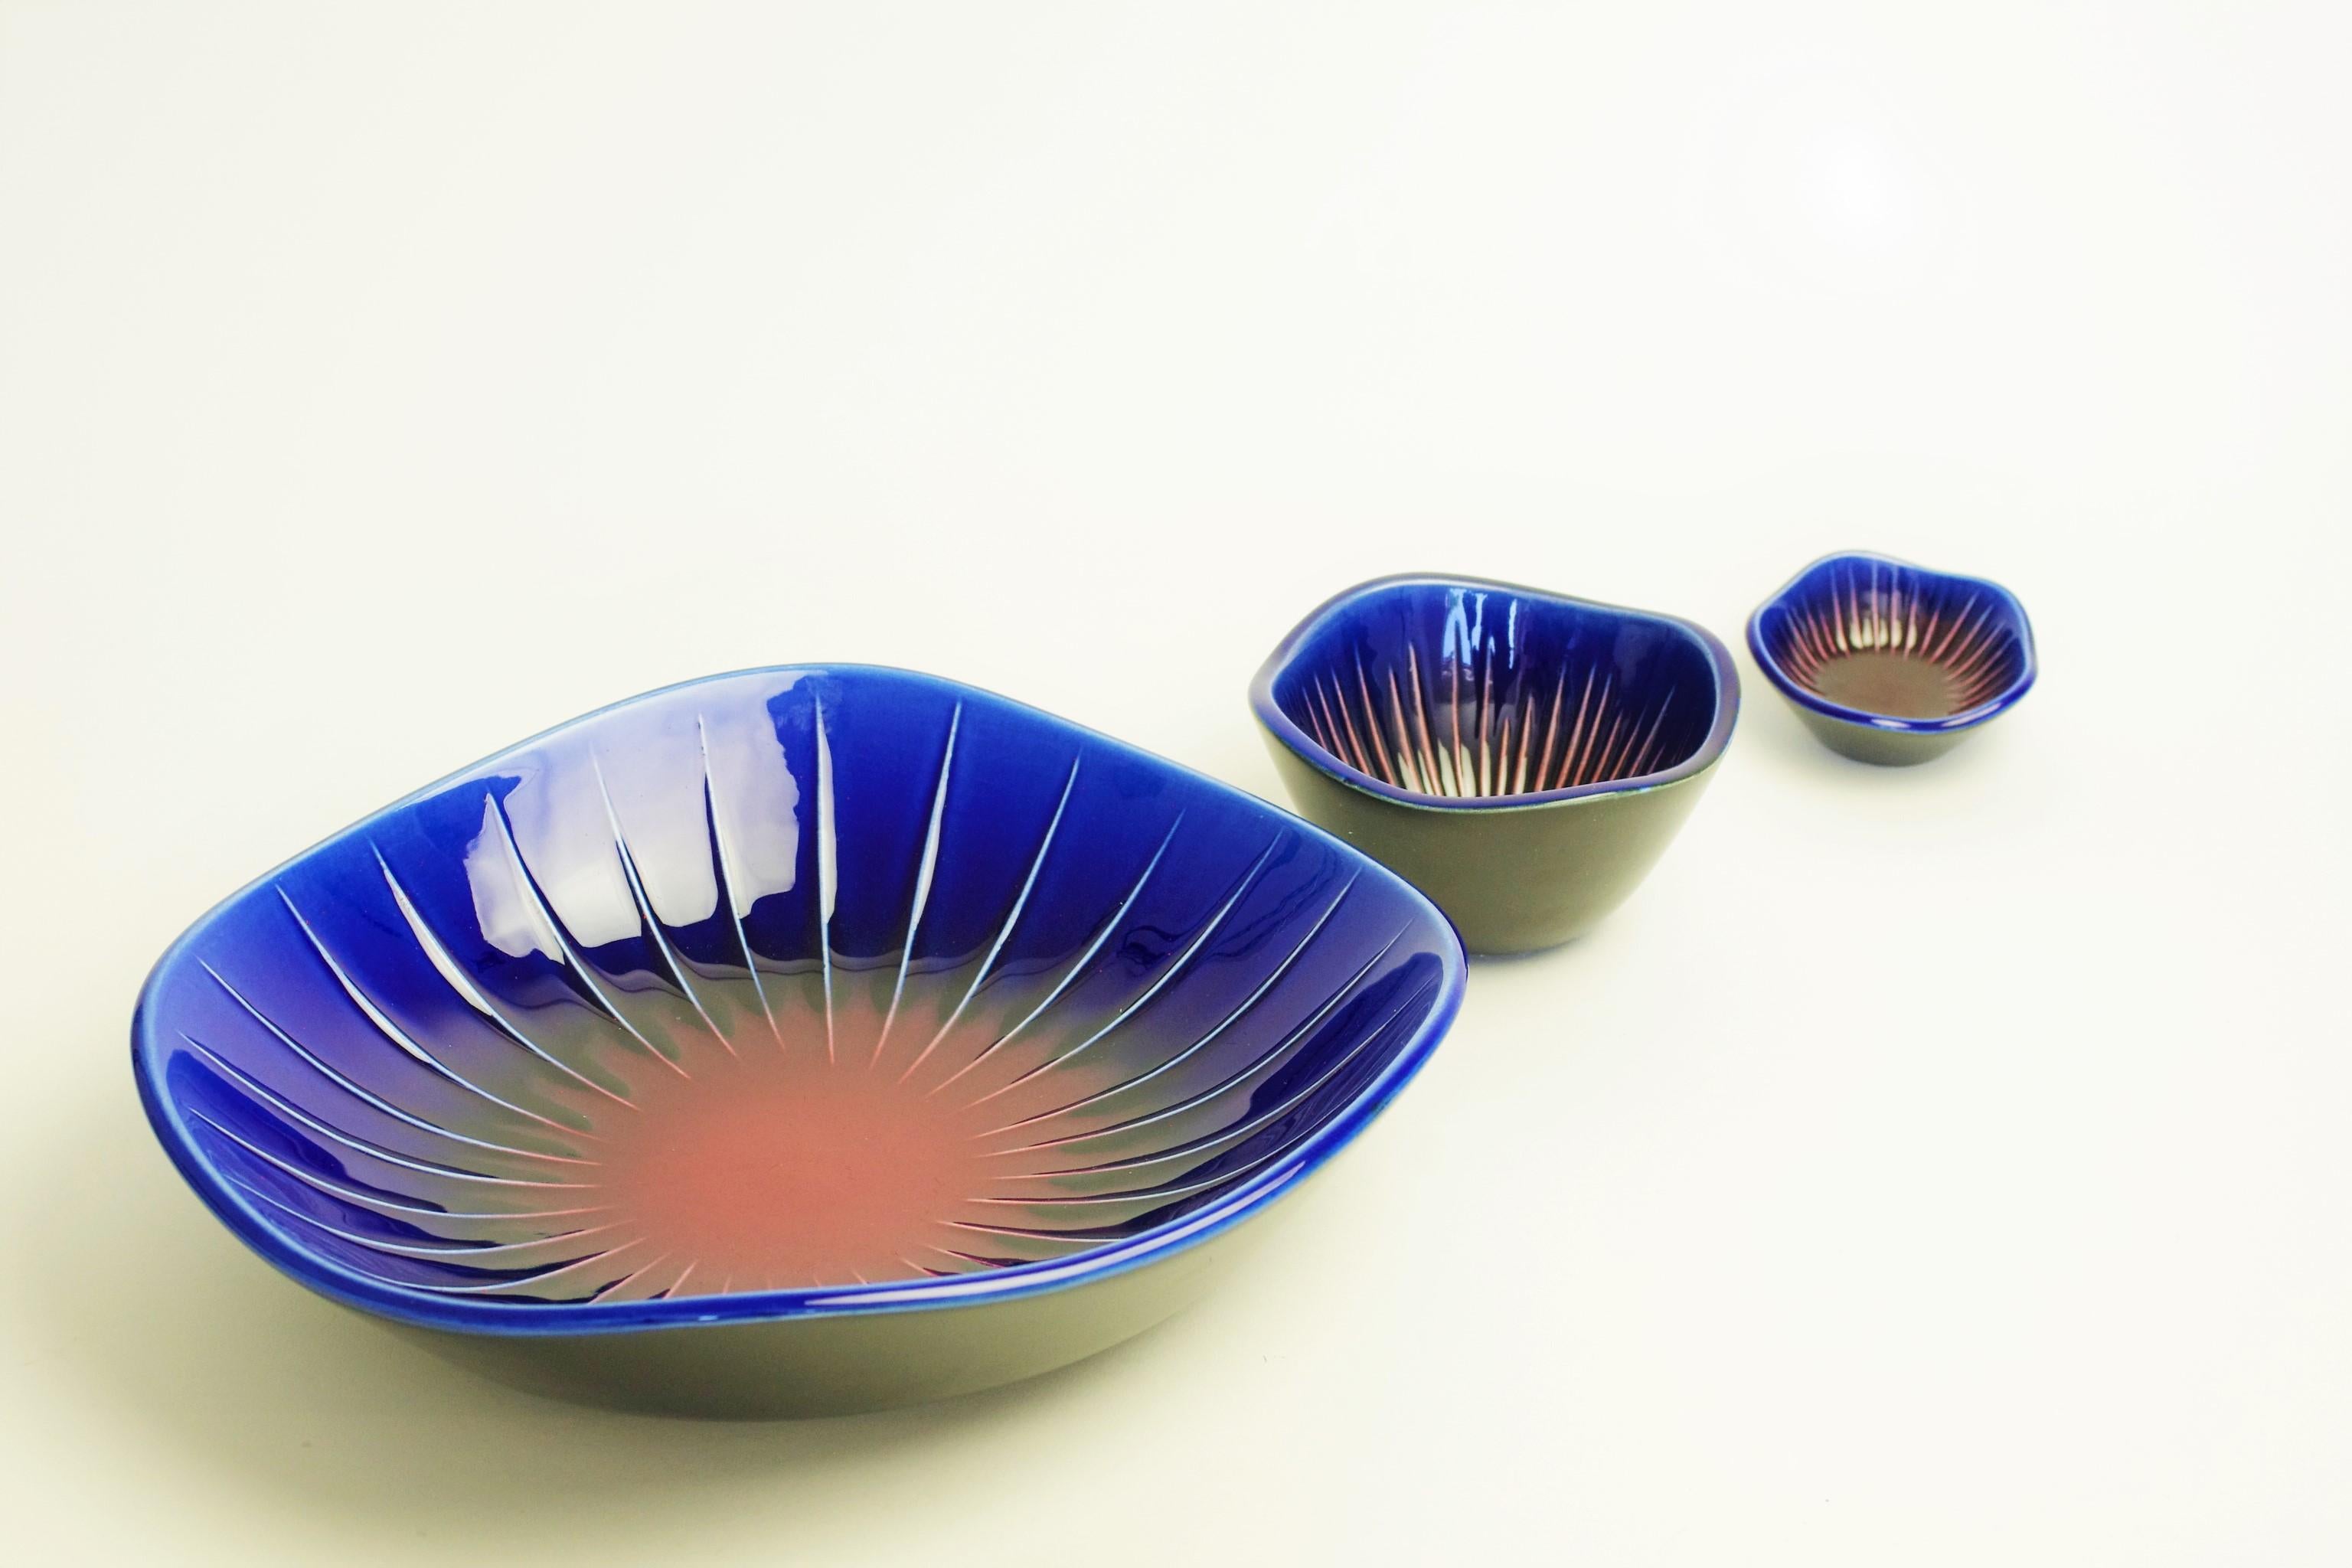 Mid-20th Century Carl-Harry Stålhane - Sparaxis - 3 Bowls For Sale